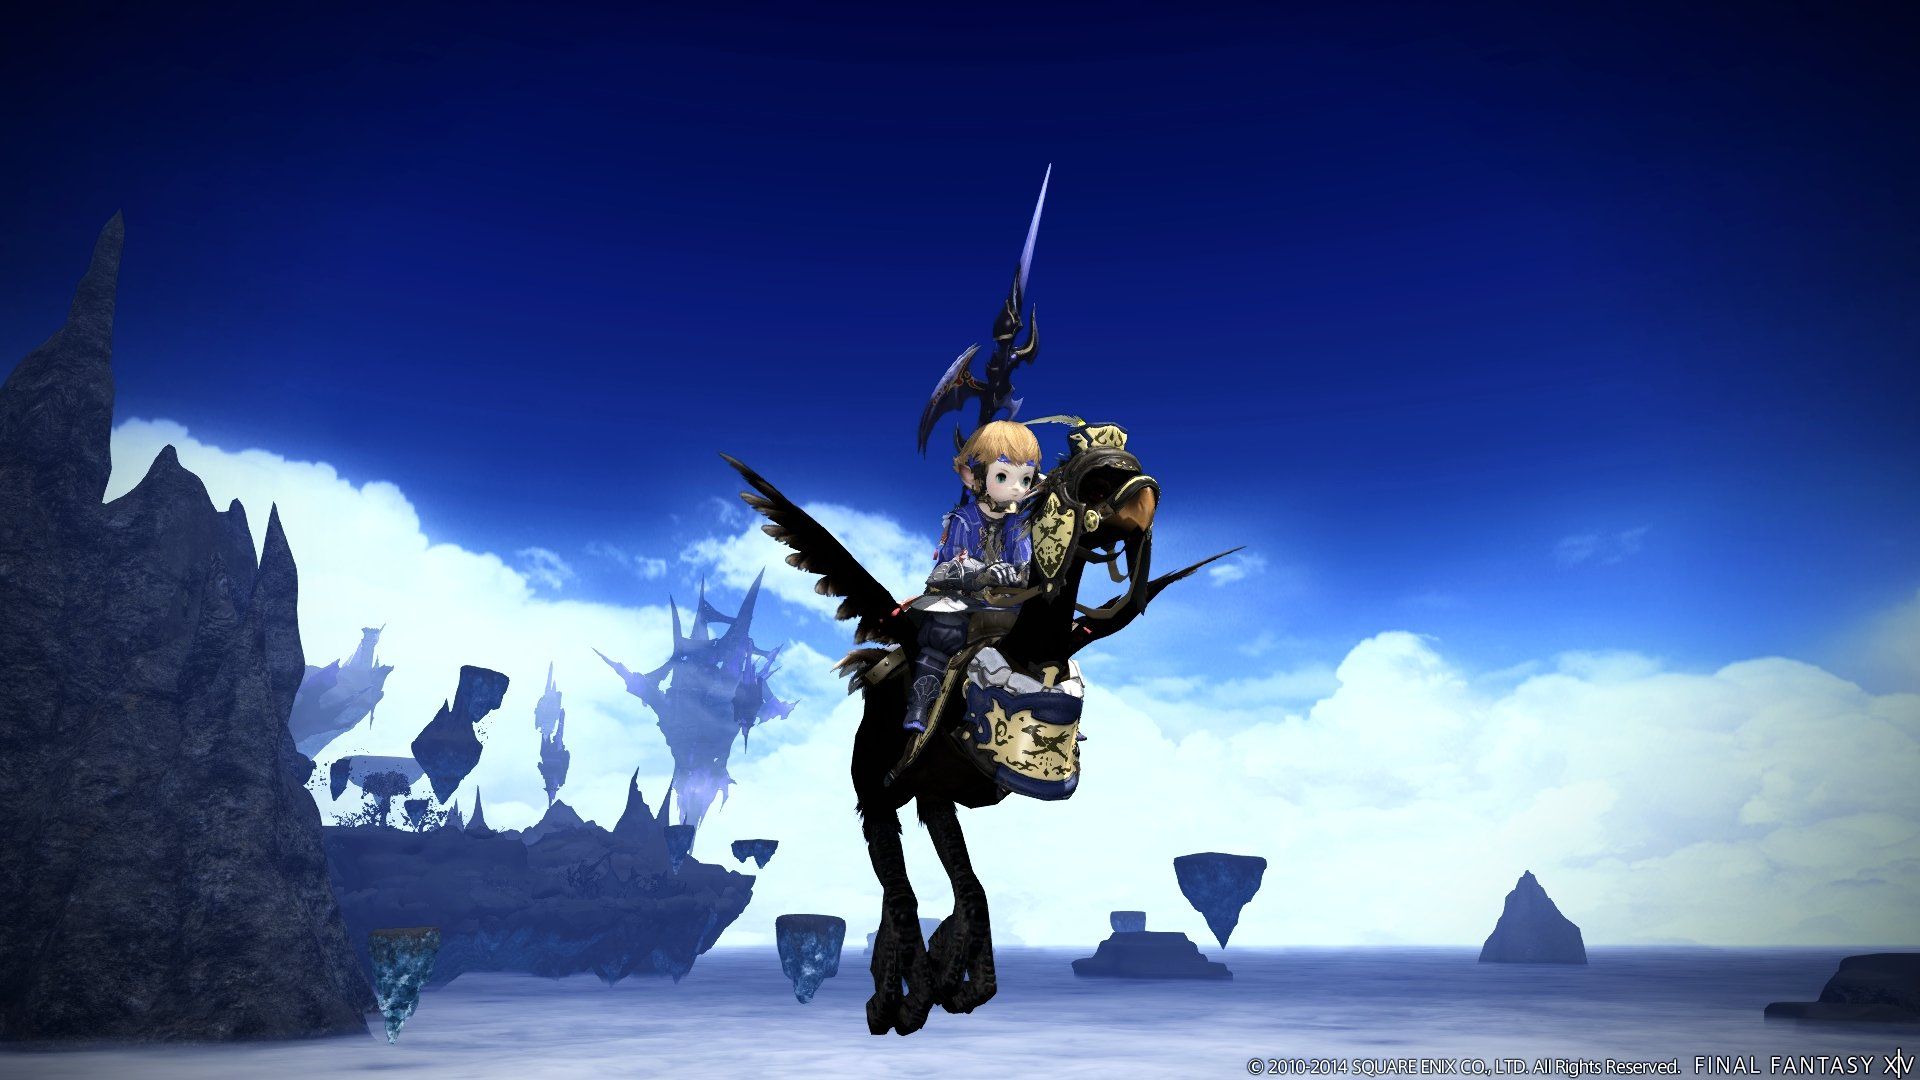 Final Fantasy XIV Expansion Screenshots Show Flying Chocobos and